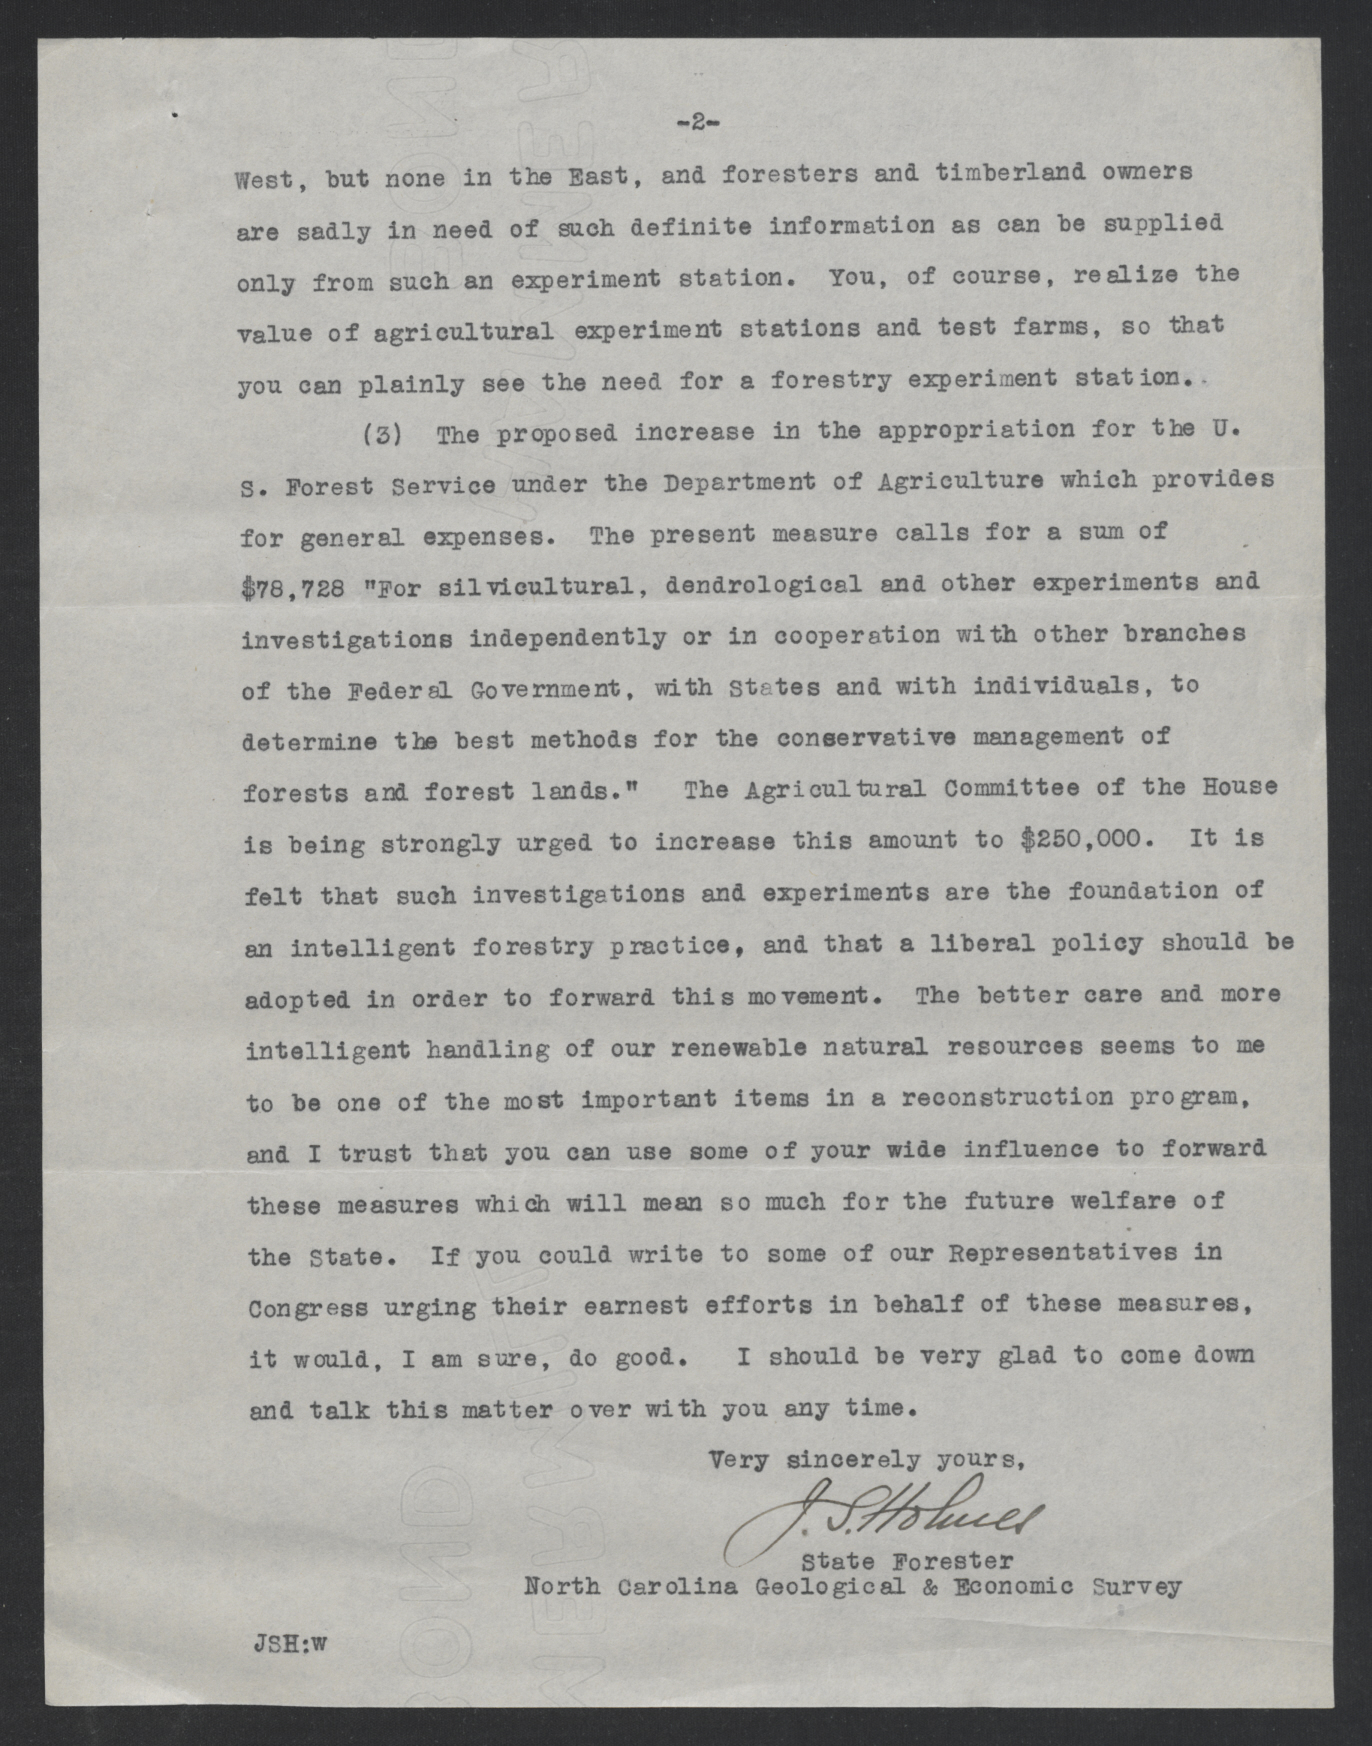 Letter from John S. Holmes to Thomas W. Bickett, January 5, 1920, page 2